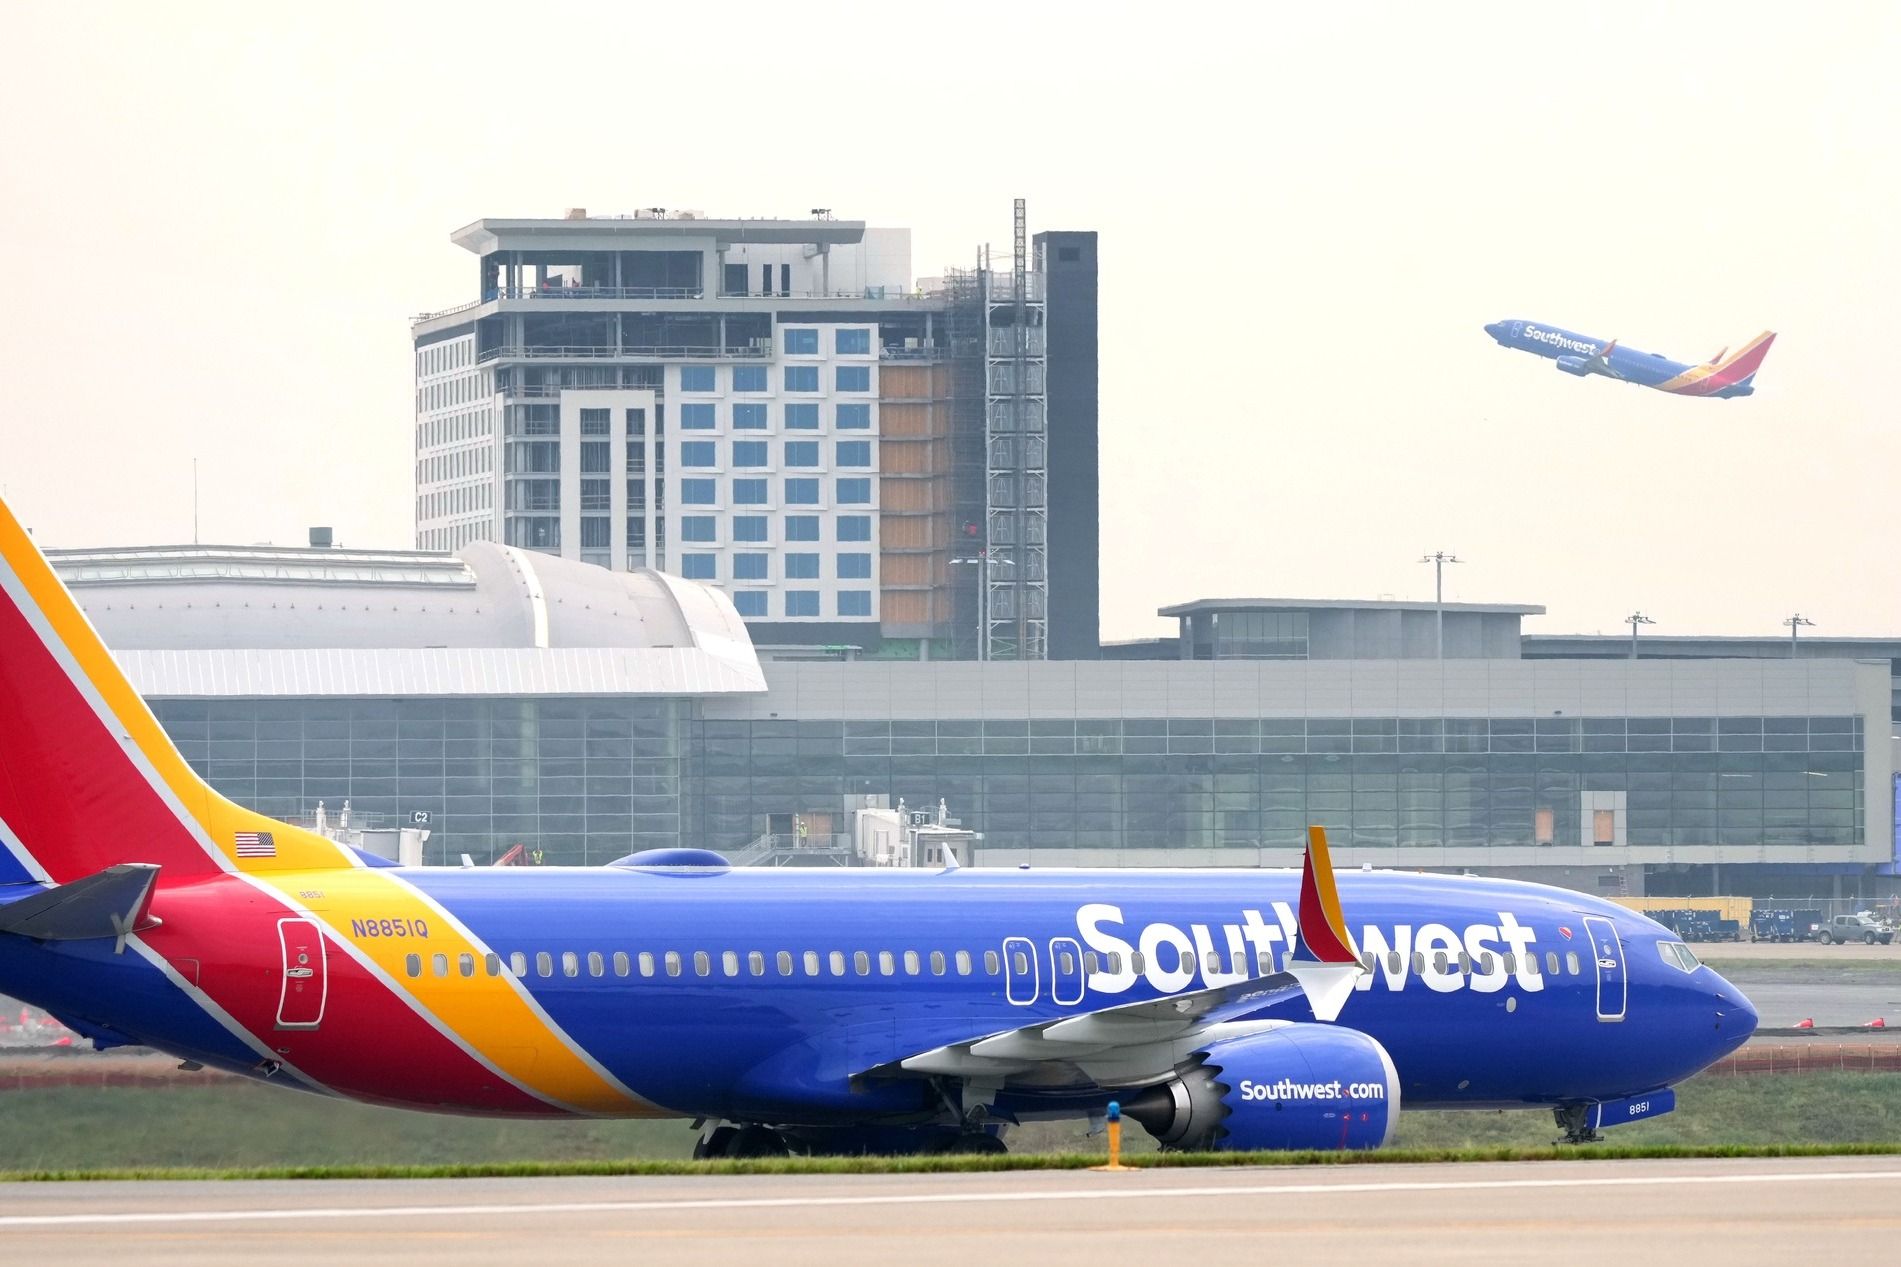 Southwest Airlines Boeing 737 MAX 8 at Nashville International Airport.